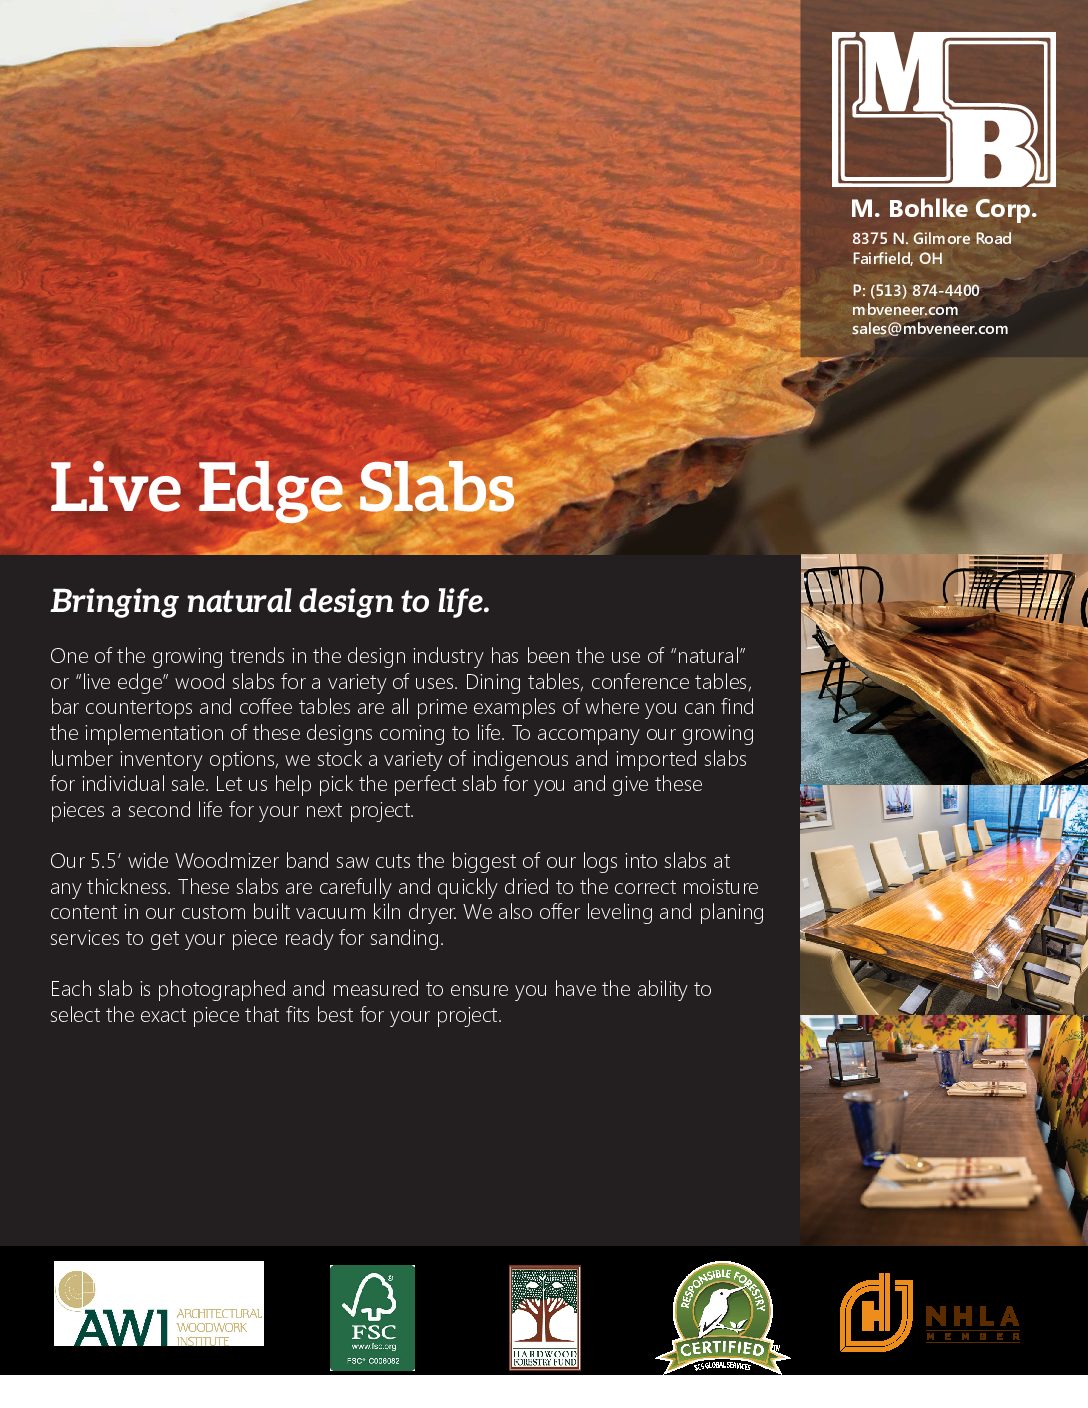 Live Edge and Lumber Services Bohlke Flier PDF.